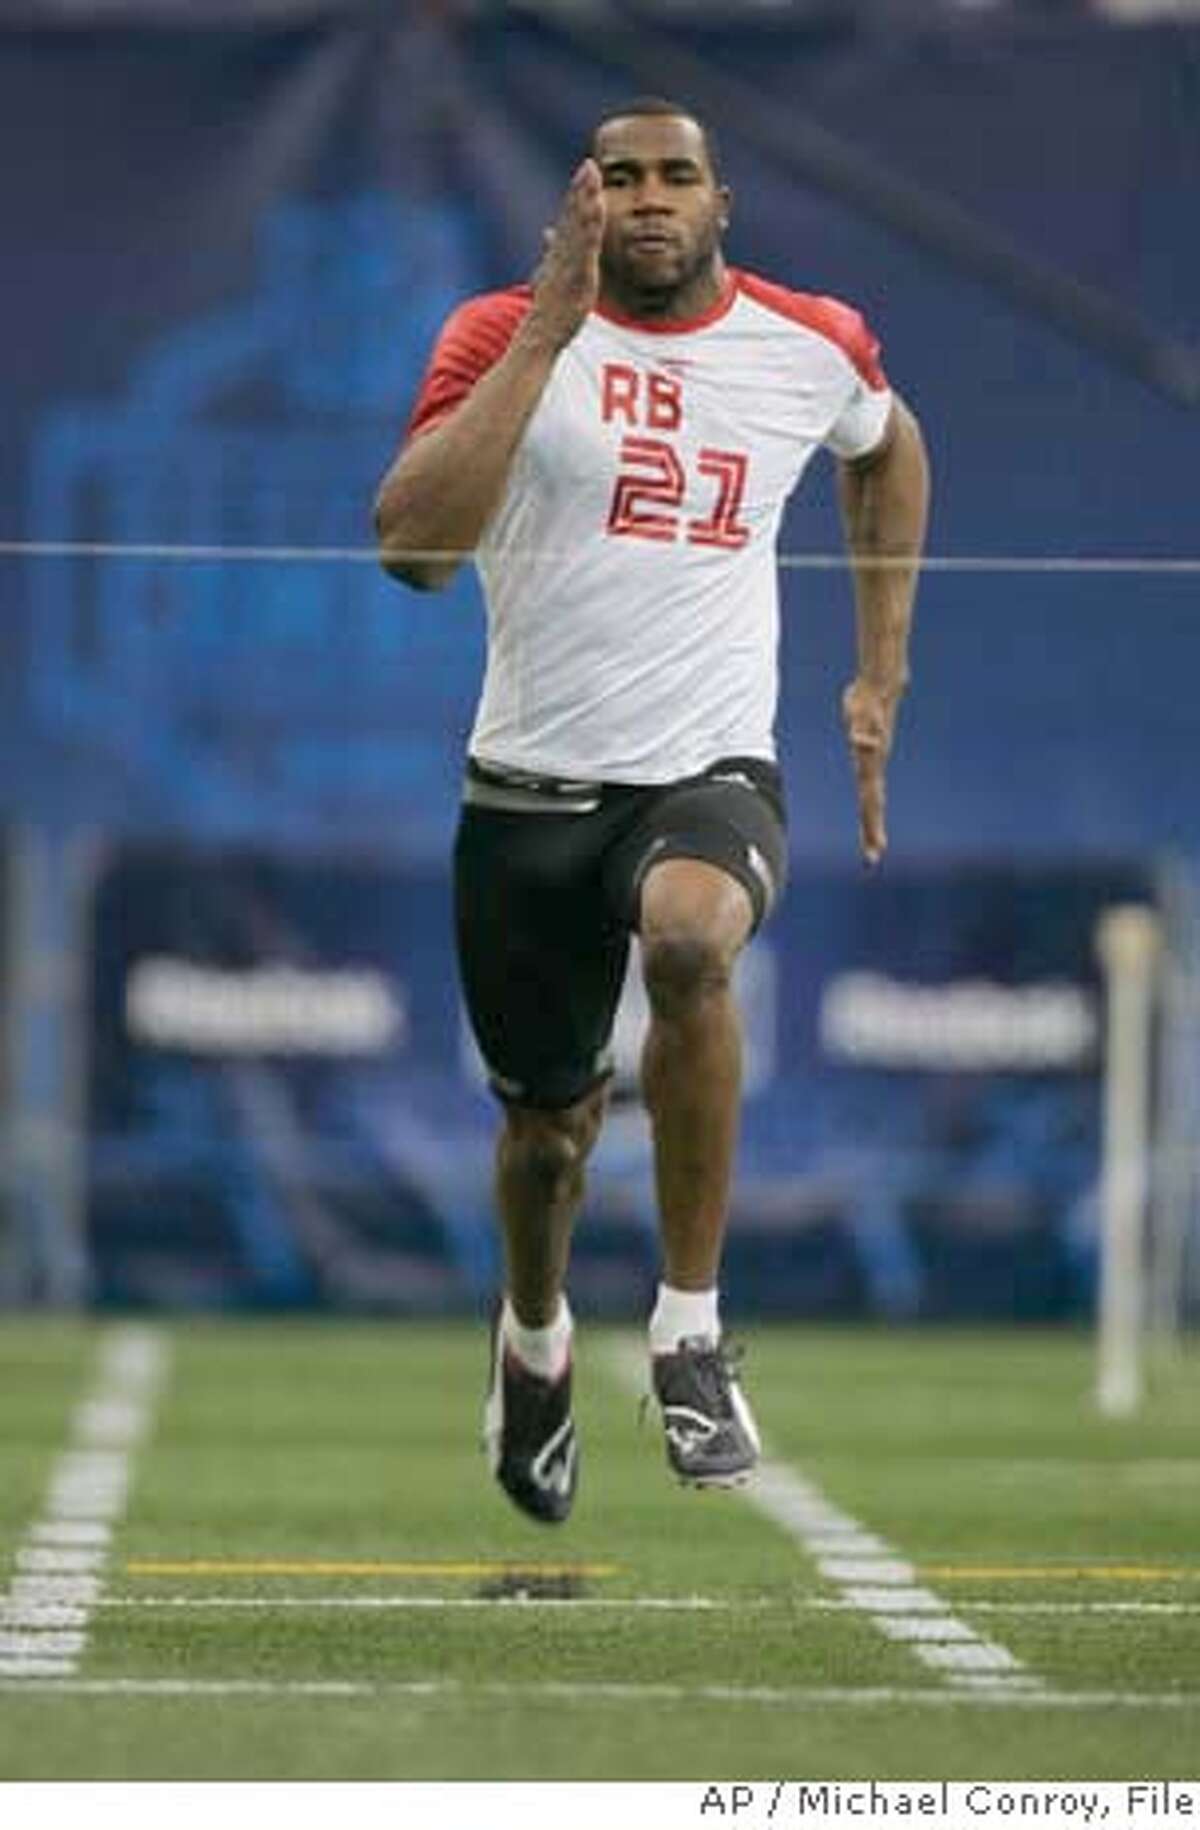 ###Live Caption:** FILE **Running back Darren McFadden, of Arkansas, runs the 40-yard dash at the NFL Combine in this Feb. 24, 2008 file photo in Indianapolis. In a couple weeks McFadden will realize a football player's dream. The star running back out of Arkansas is expected to be one of the first players drafted in the 2008 NFL Draft. (AP Photo/Michael Conroy, File)###Caption History:** FILE **Running back Darren McFadden, of Arkansas, runs the 40-yard dash at the NFL Combine in this Feb. 24, 2008 file photo in Indianapolis. In a couple weeks McFadden will realize a football player's dream. The star running back out of Arkansas is expected to be one of the first players drafted in the 2008 NFL Draft. (AP Photo/Michael Conroy, File)###Notes:Darren McFadden###Special Instructions:FEB. 24, 2008 FILE ** EFE OUT EFE OUT